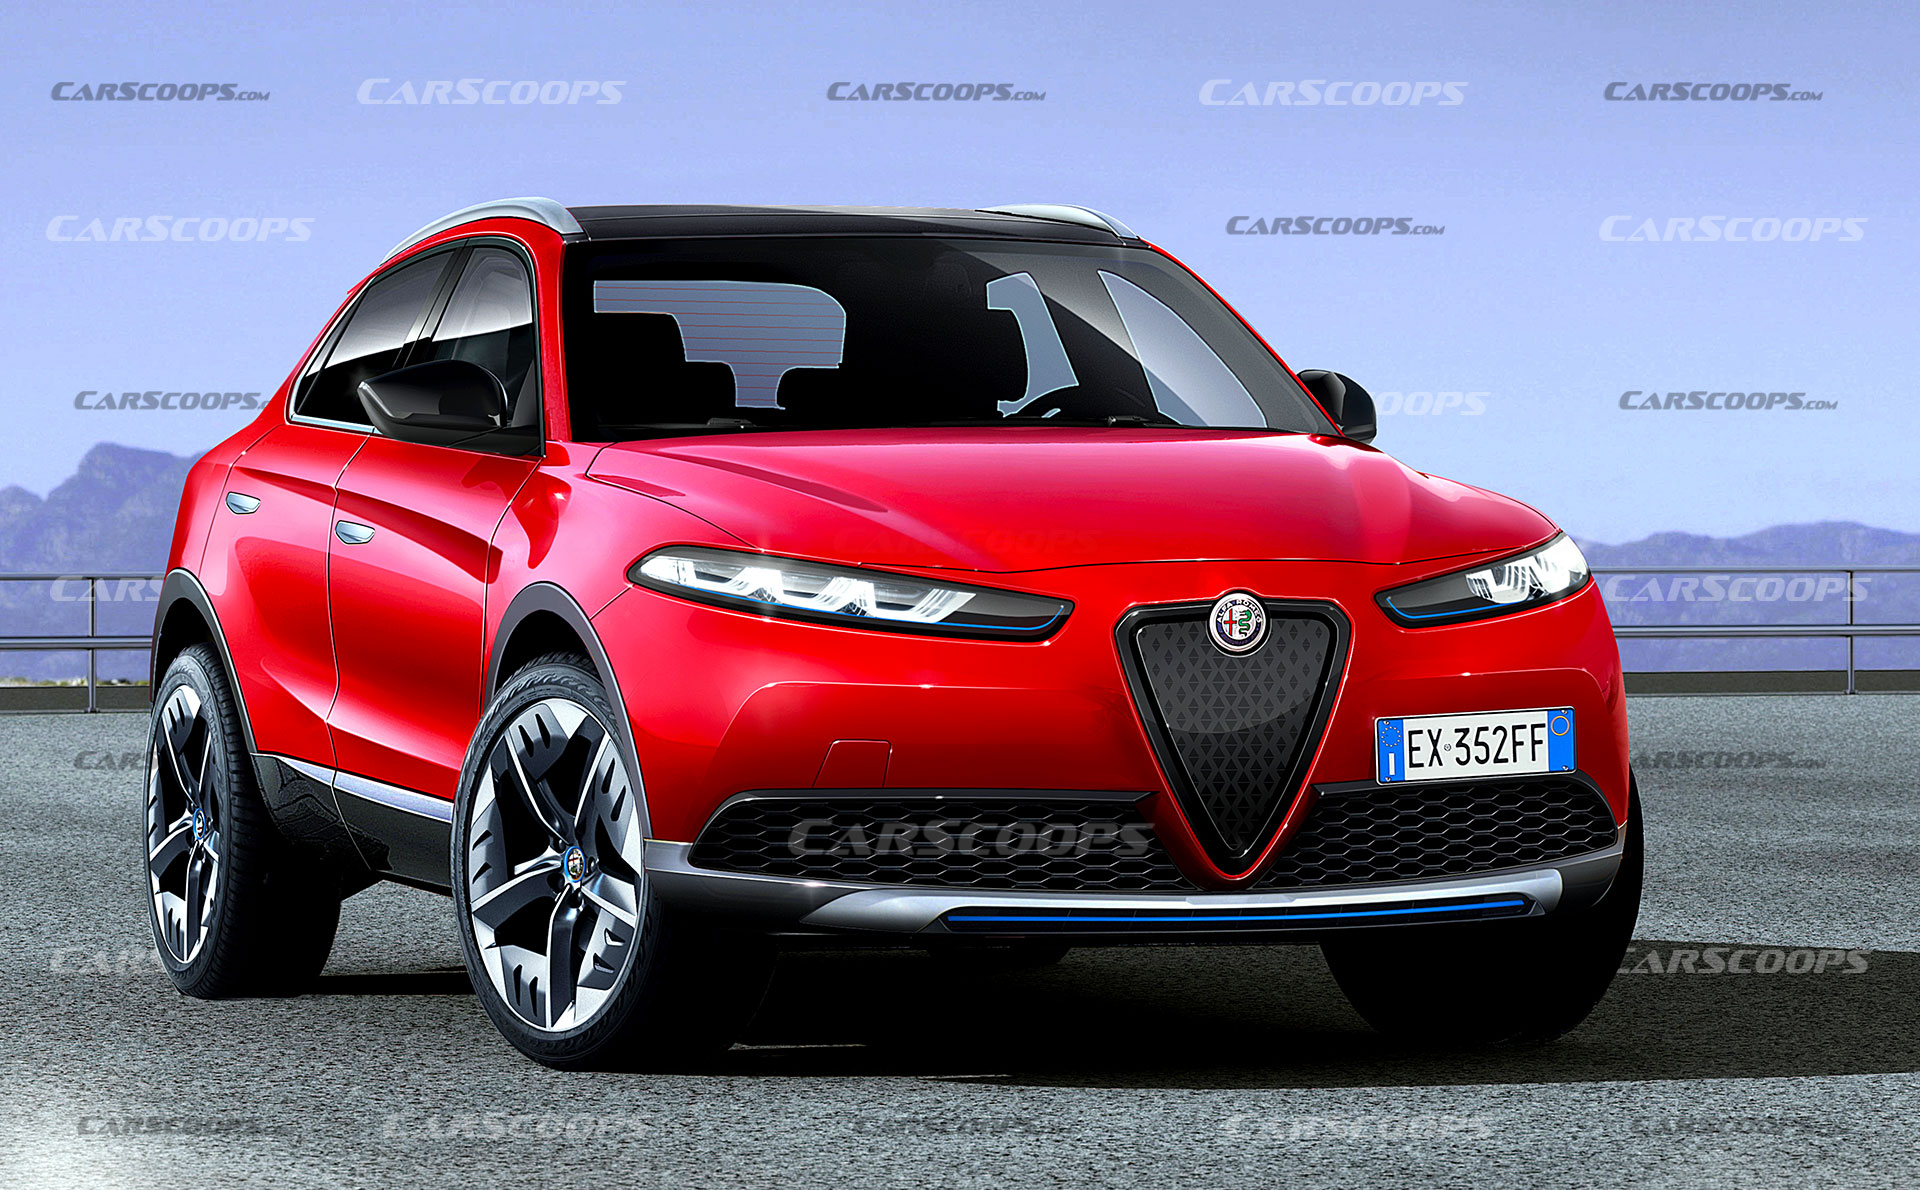 New Alfa Romeo Palade Here’s Everything We Know About The Stylish